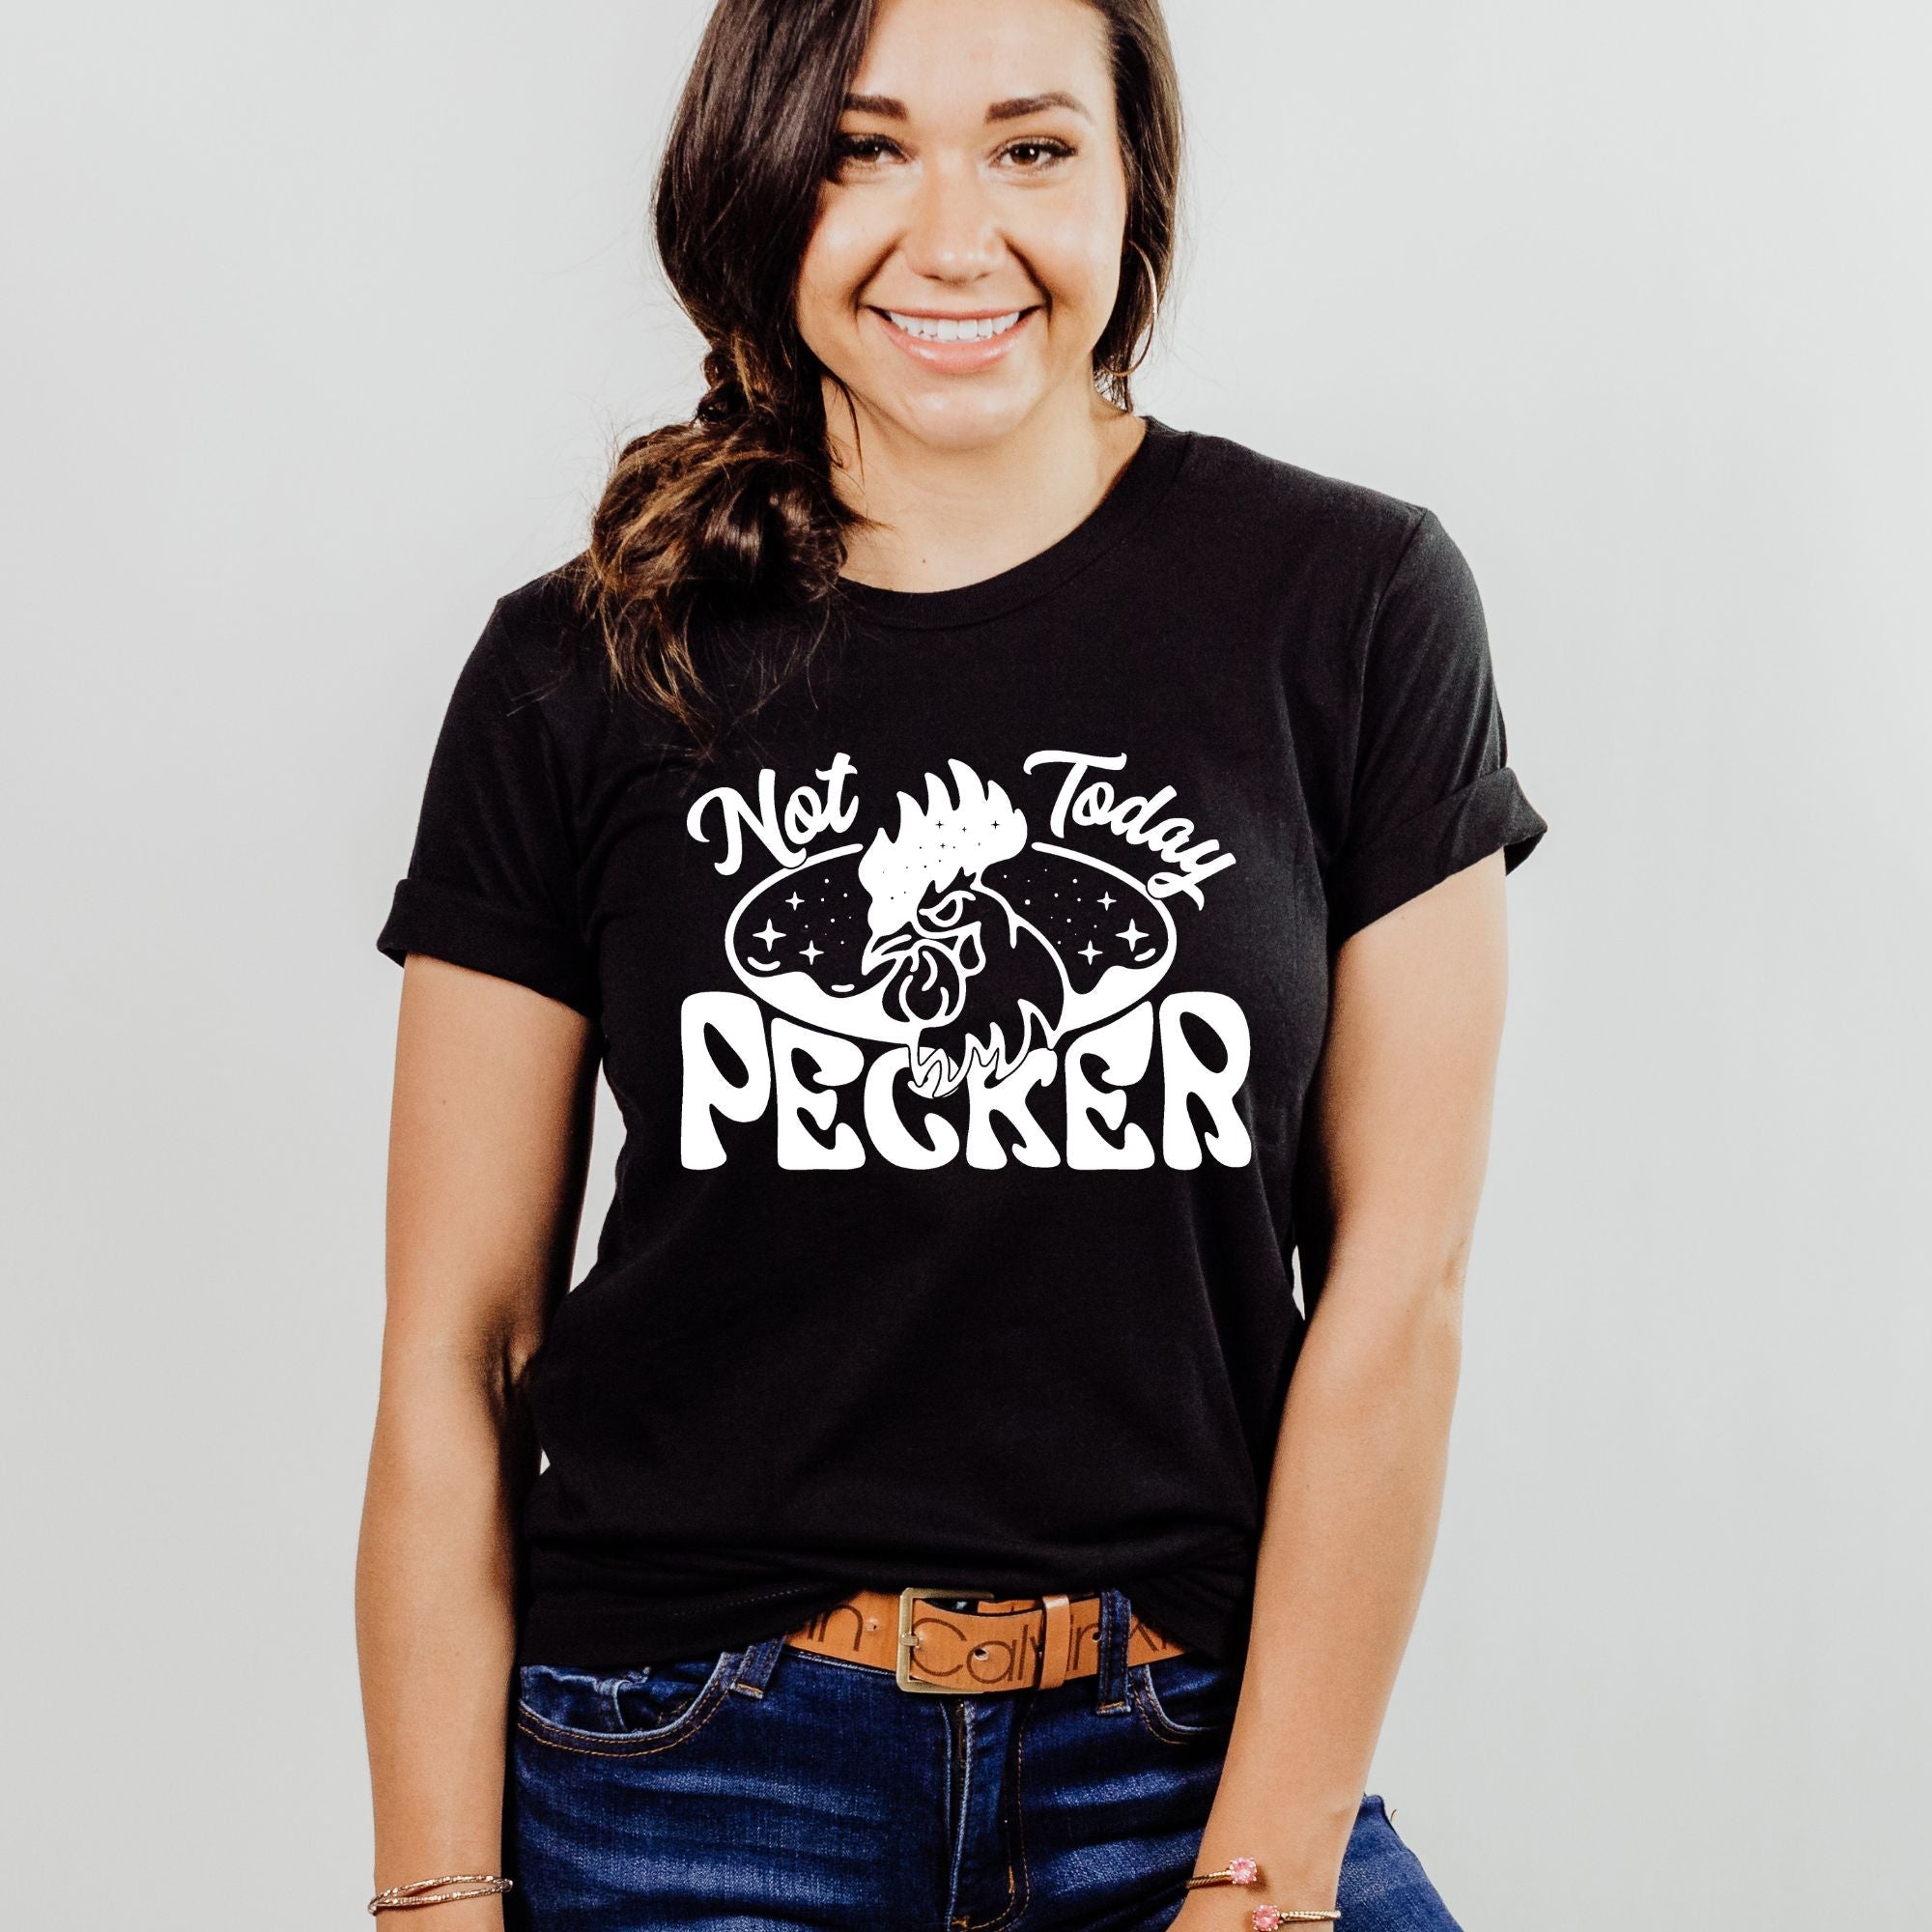 Not Today Pecker Hilarious Chicken Graphic Tee *UNISEX FIT*-Graphic Tees-208 Tees Wholesale, Idaho